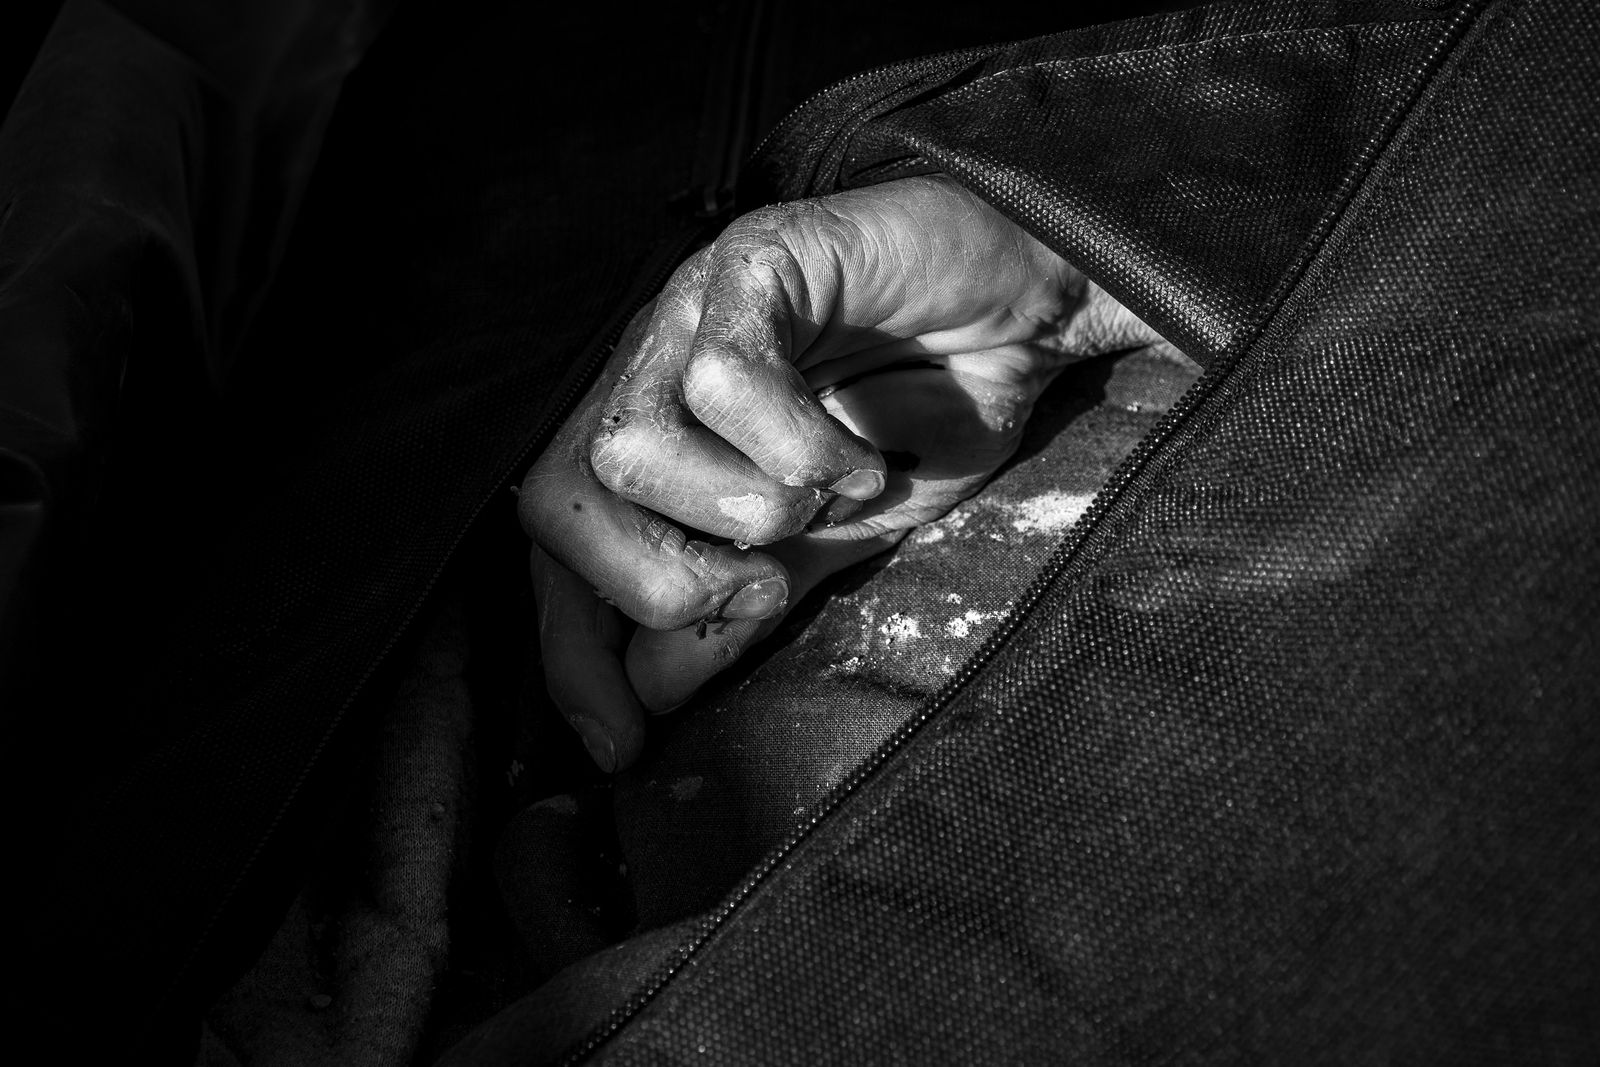 © Zobair Movahhed - A lone hand is visible through a body bag in a dumpster full of the dead bodies of Afghan refugees.